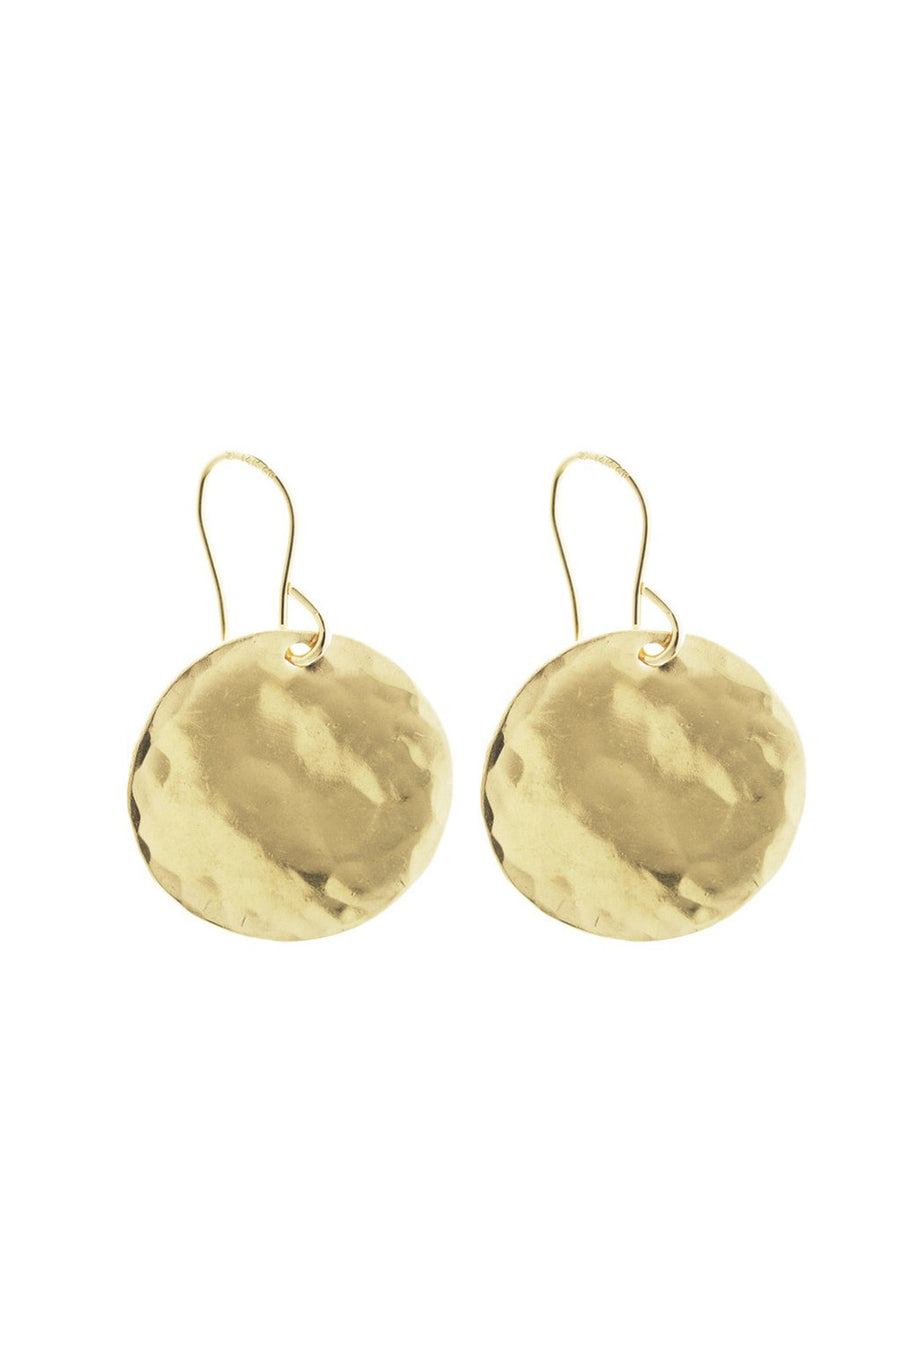 LARGE HAMMERED DISK EARRING GOLD - CrateExpectations